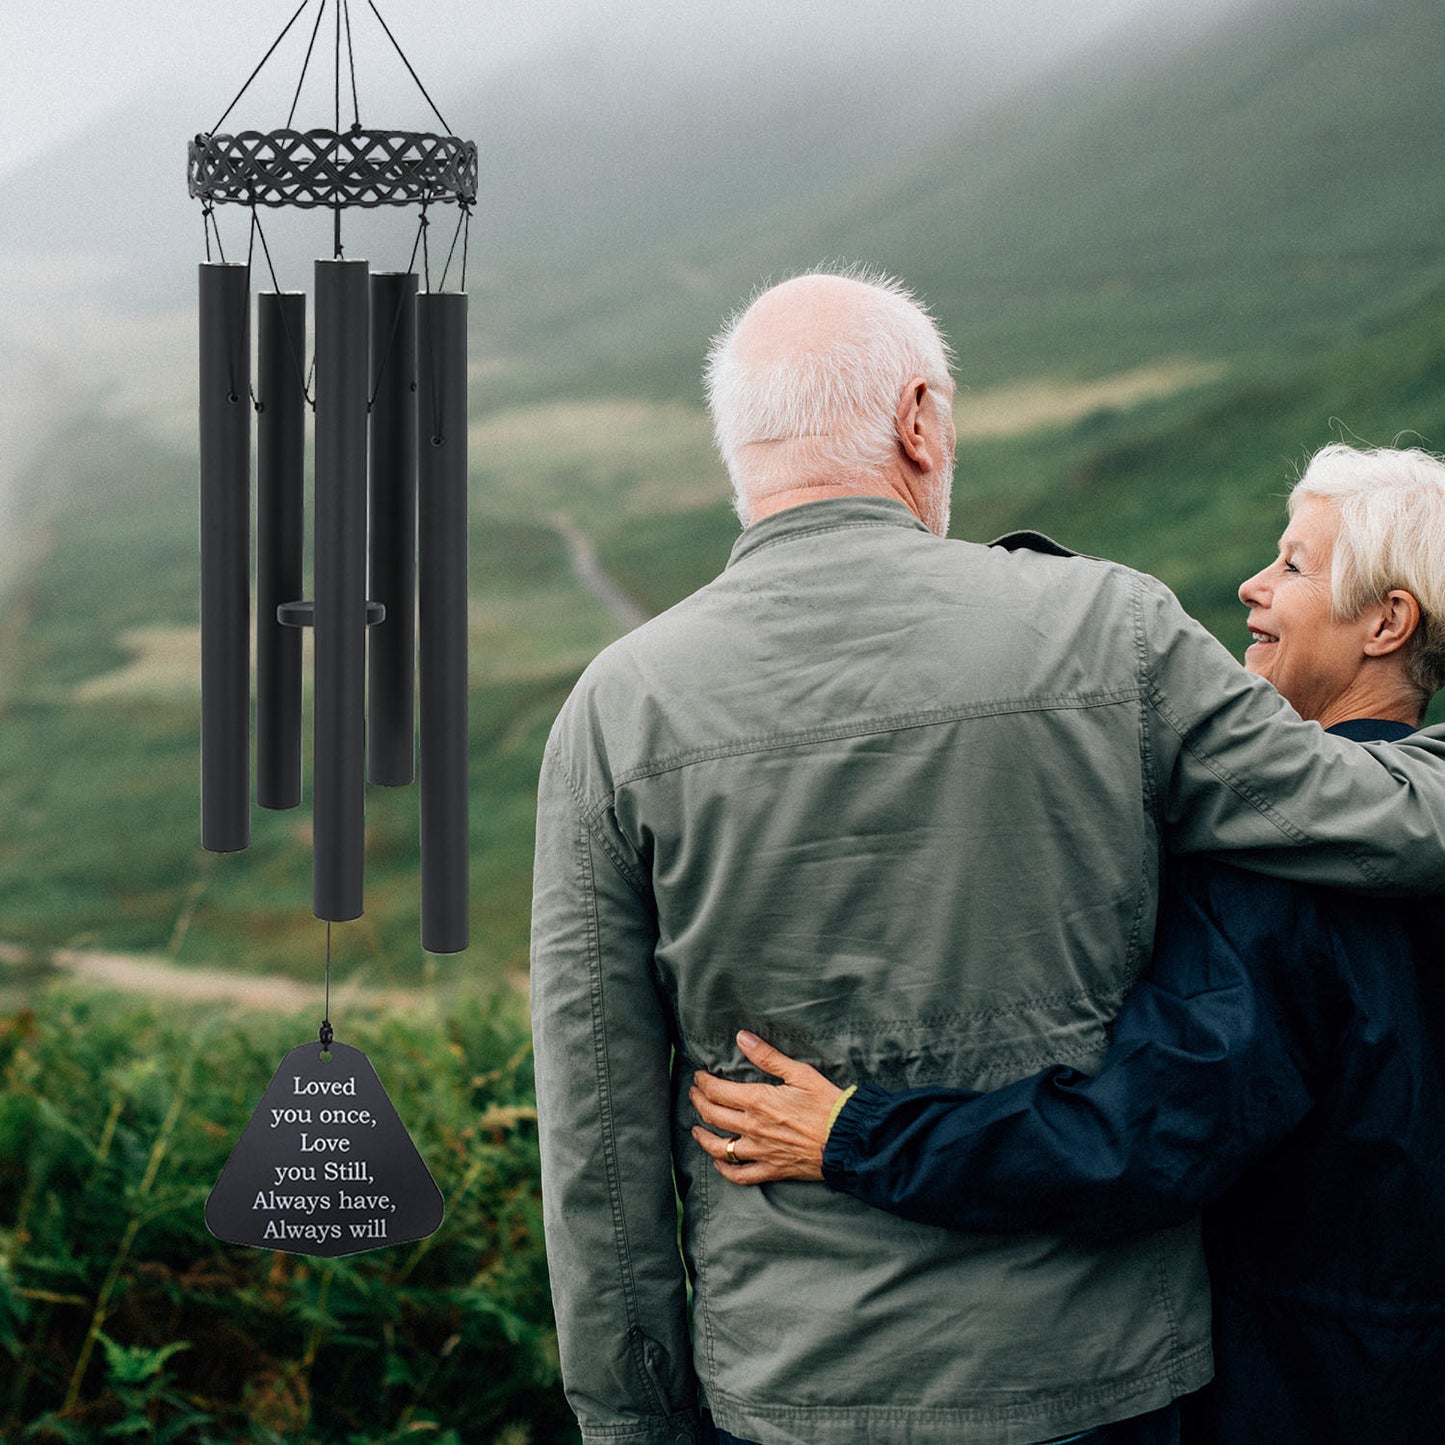 30-Inch Memorial Wind Chimes for Outdoors - Elegant Bereavement Gift with 5 Tuned Black Aluminum Tubes, Perfect for Home, Garden, Patio Décor